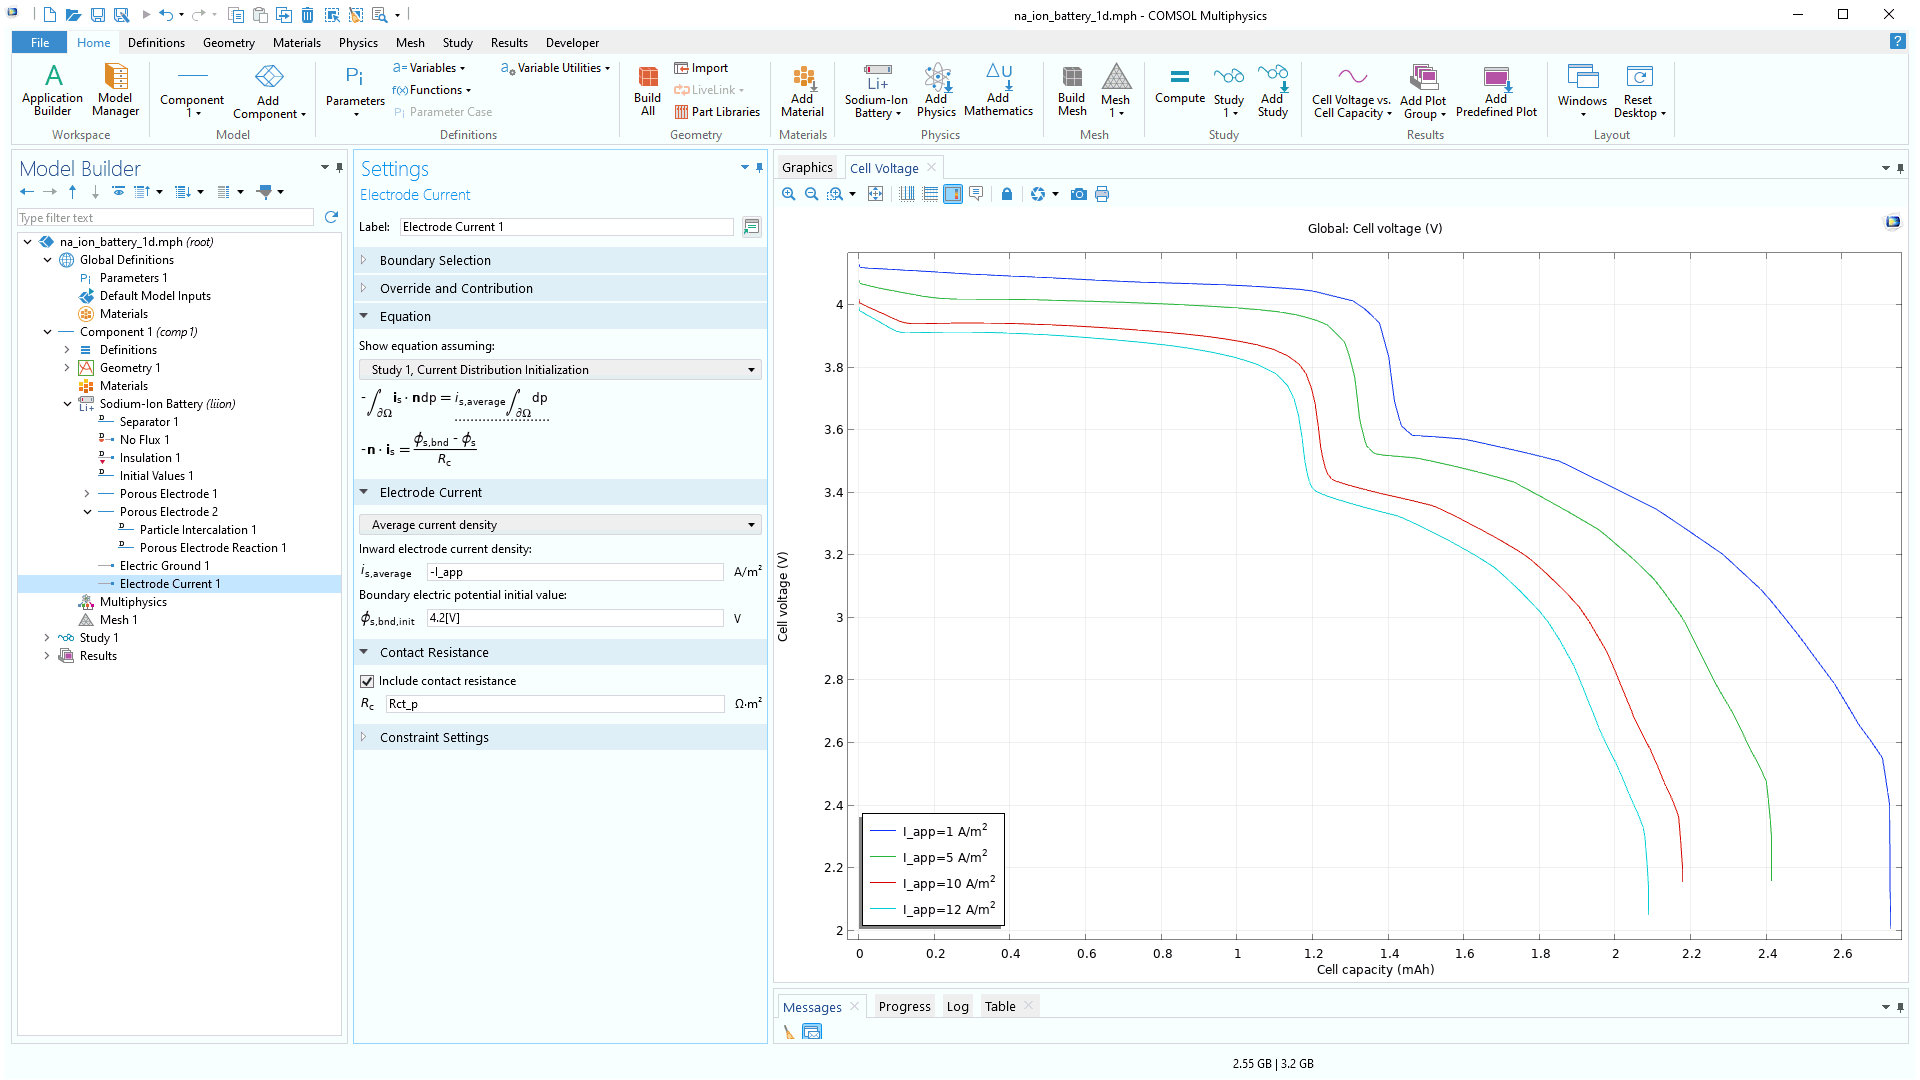 The COMSOL Multiphysics UI showing the Model Builder with the Electrode Current node highlighted, the corresponding Settings window, and a 1D plot in the Graphics window.